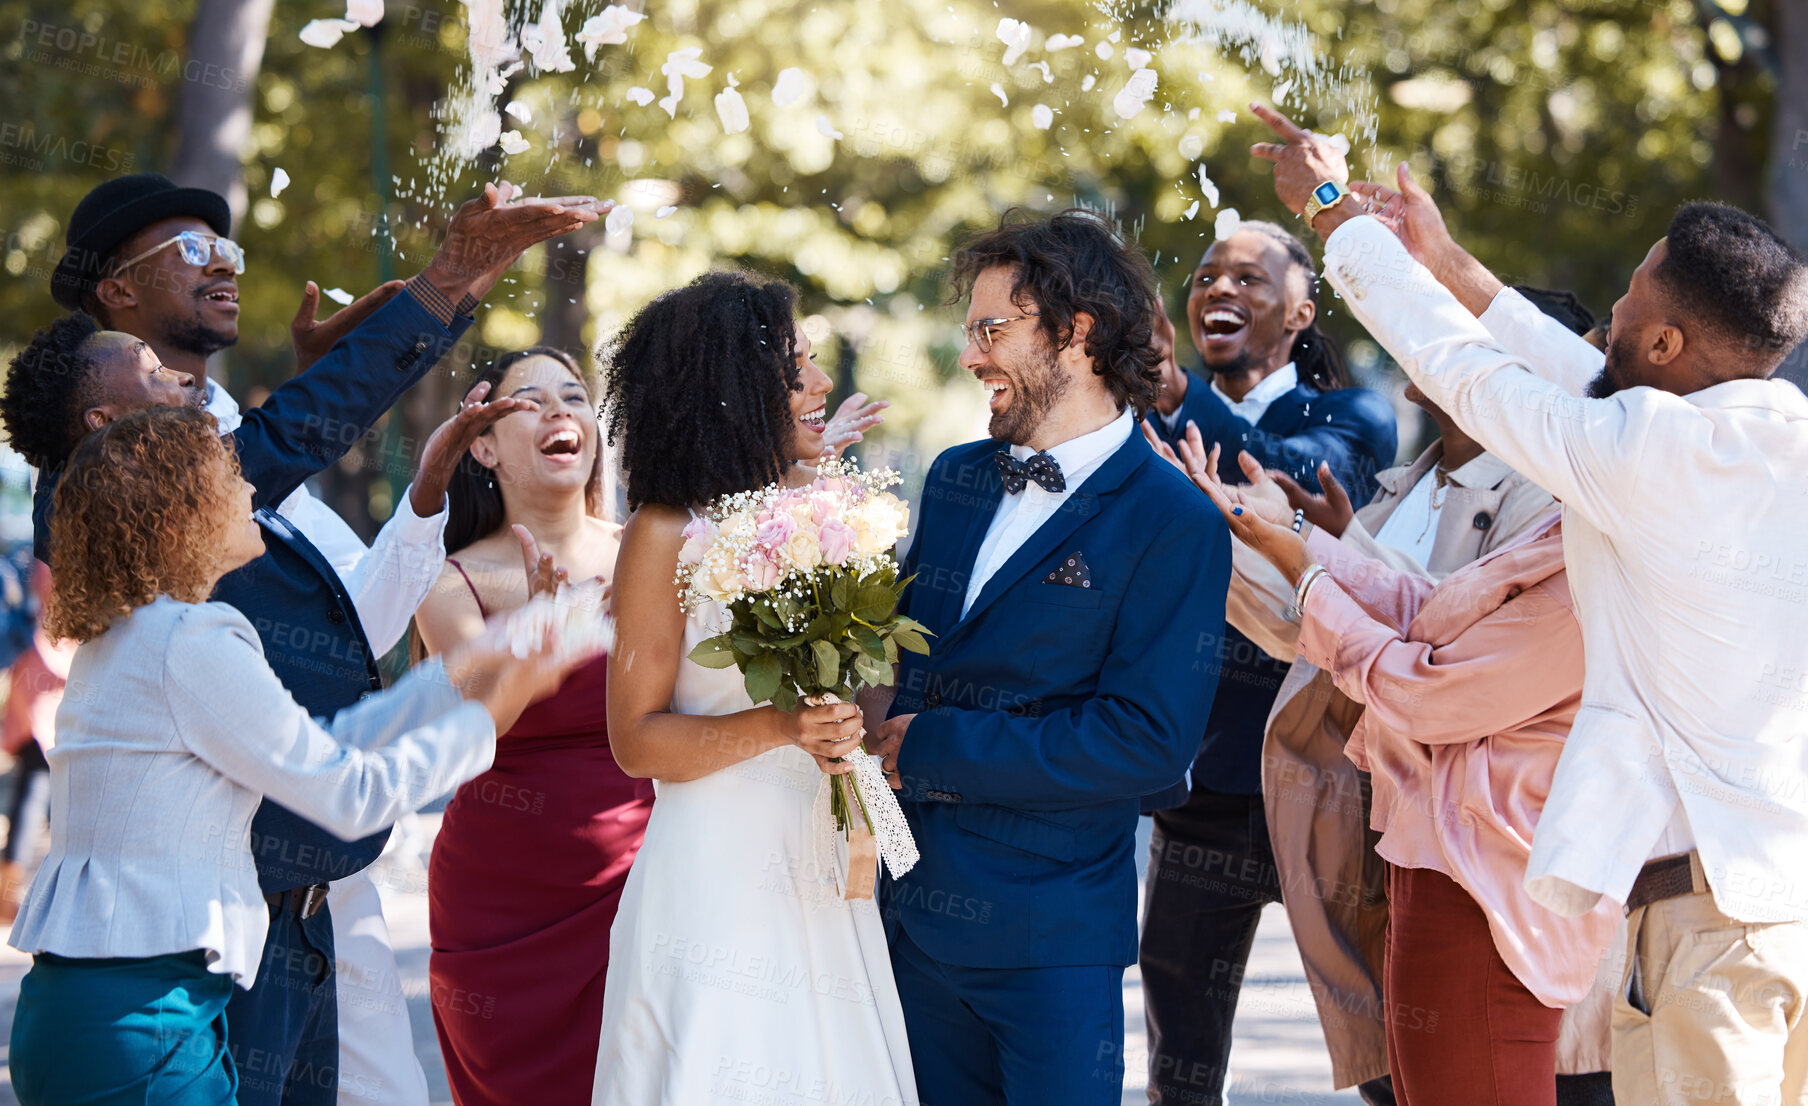 Buy stock photo Confetti, wedding couple and marriage celebration of crowd throwing flower petals outdoor. Happiness, excited and social event with bride and man laughing from love and congratulations applause 